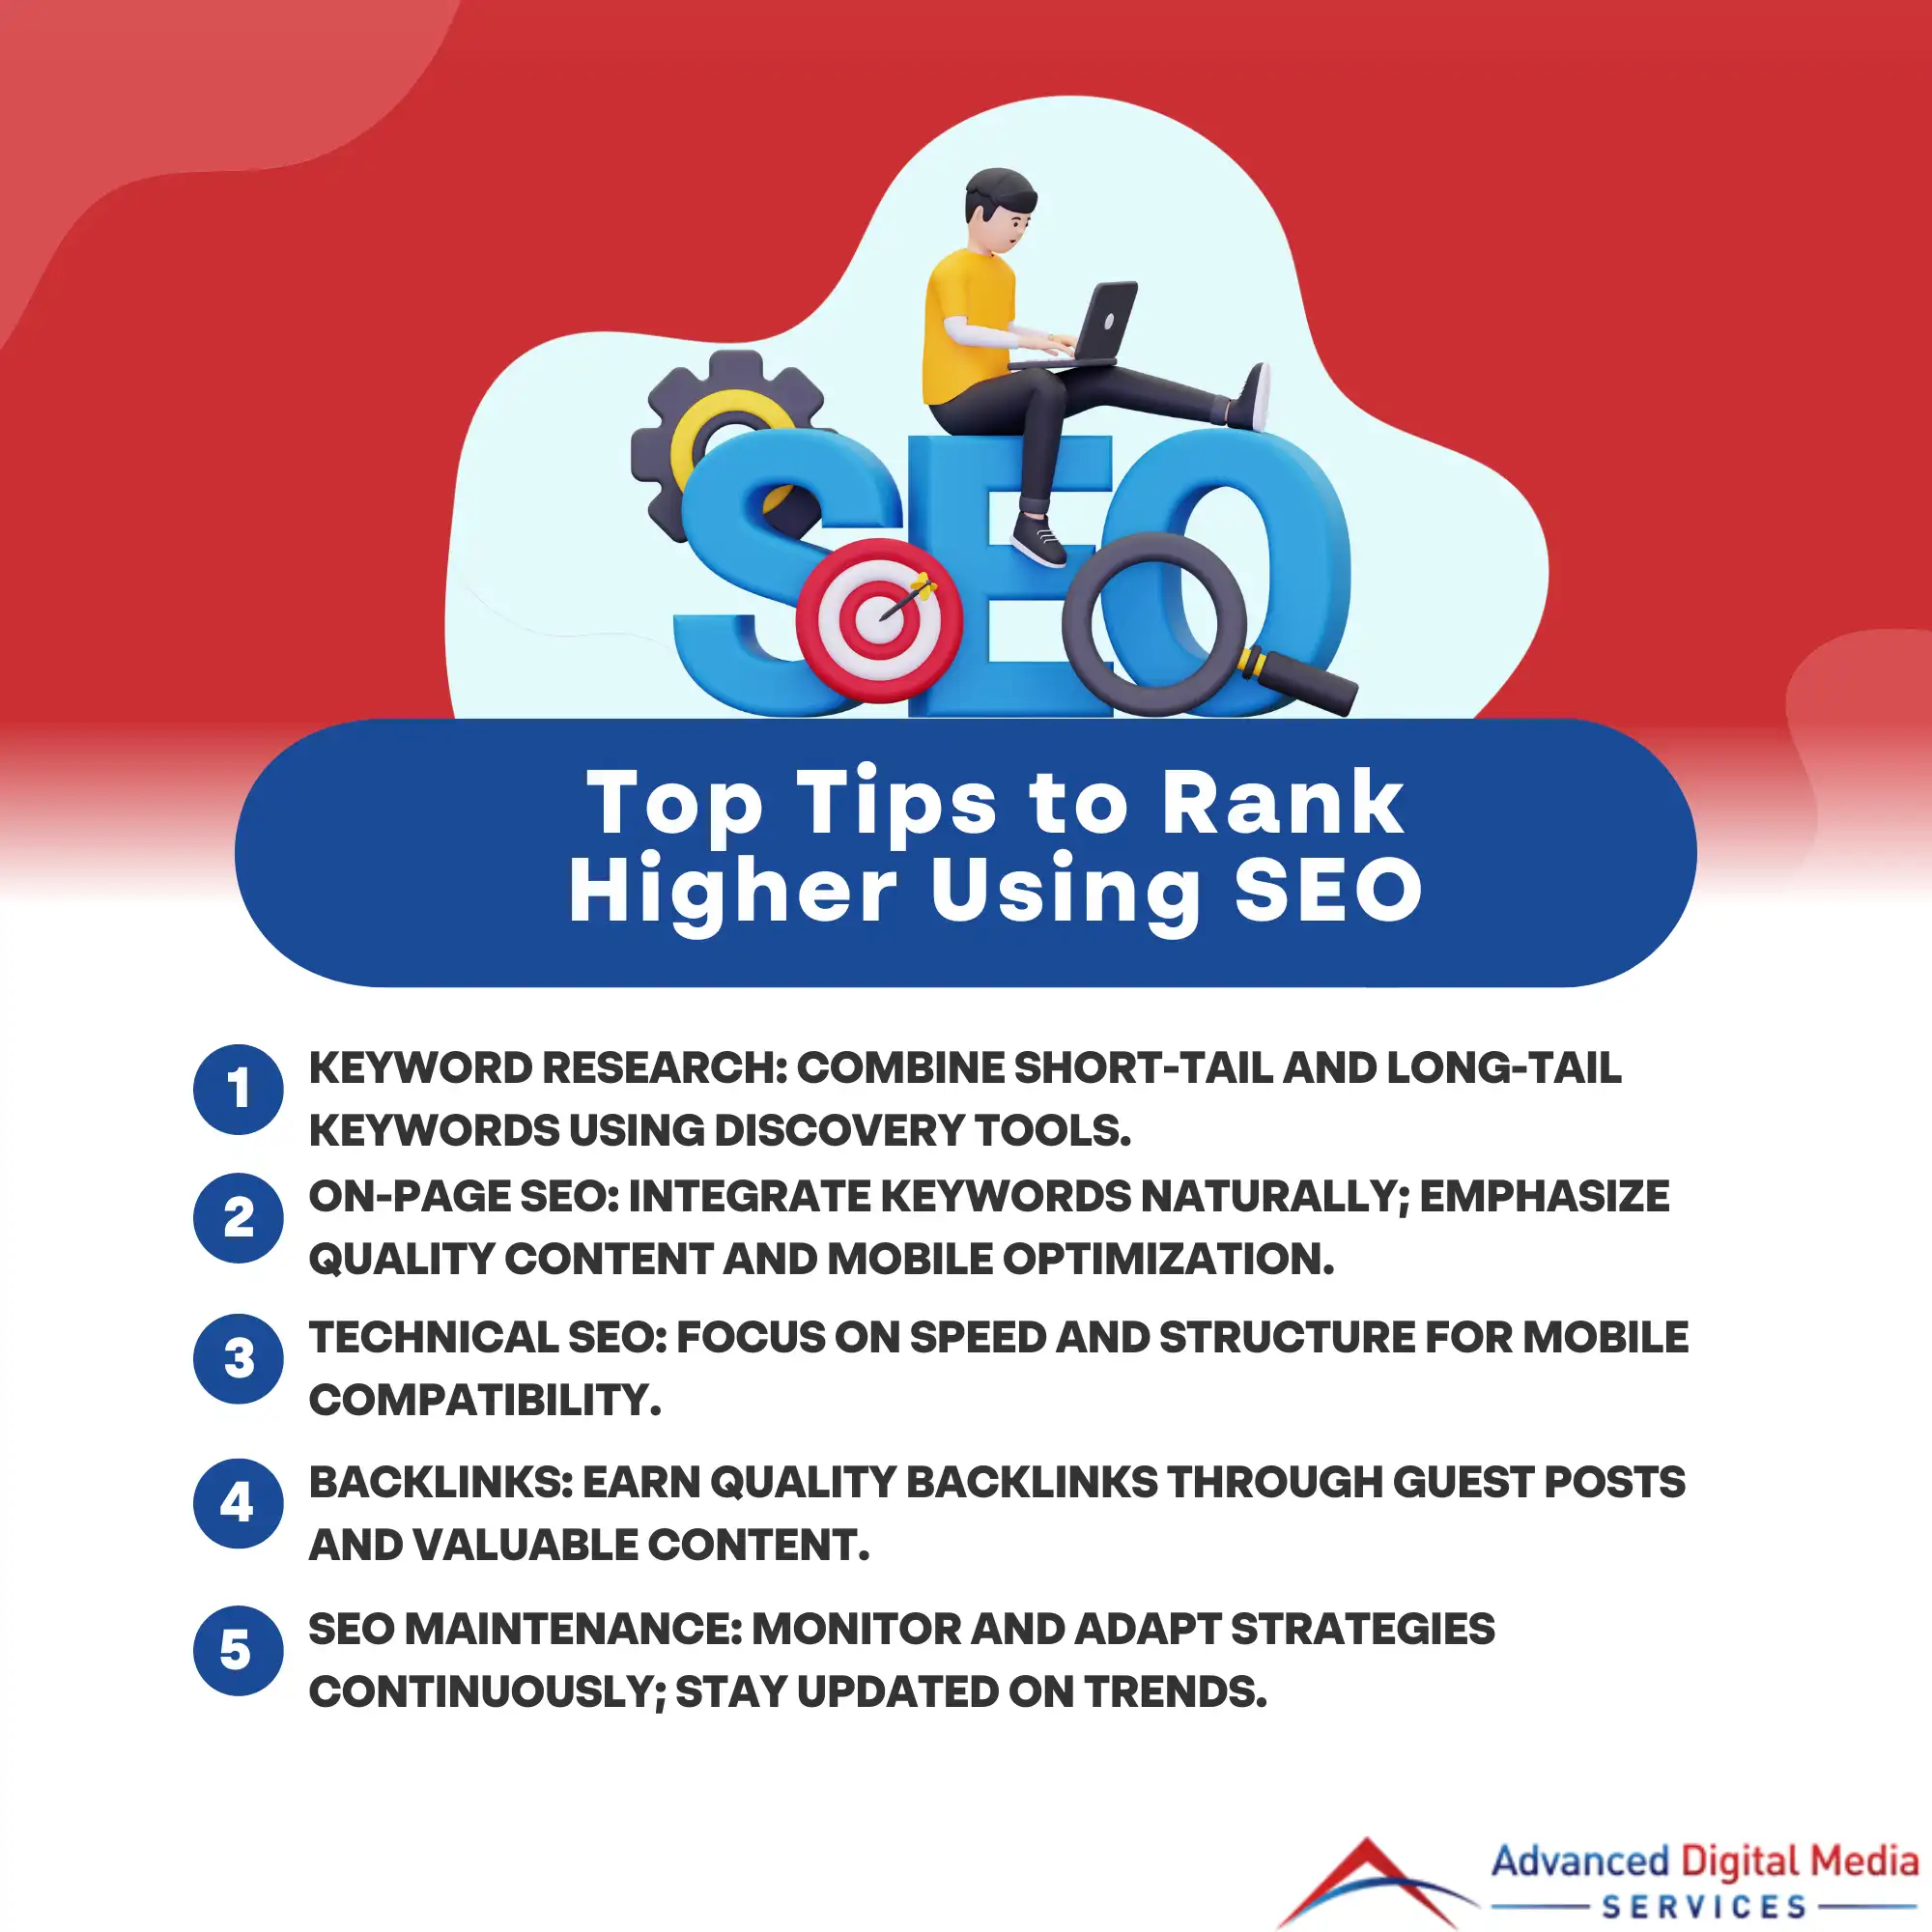 Top Tips to Rank Higher Using SEO